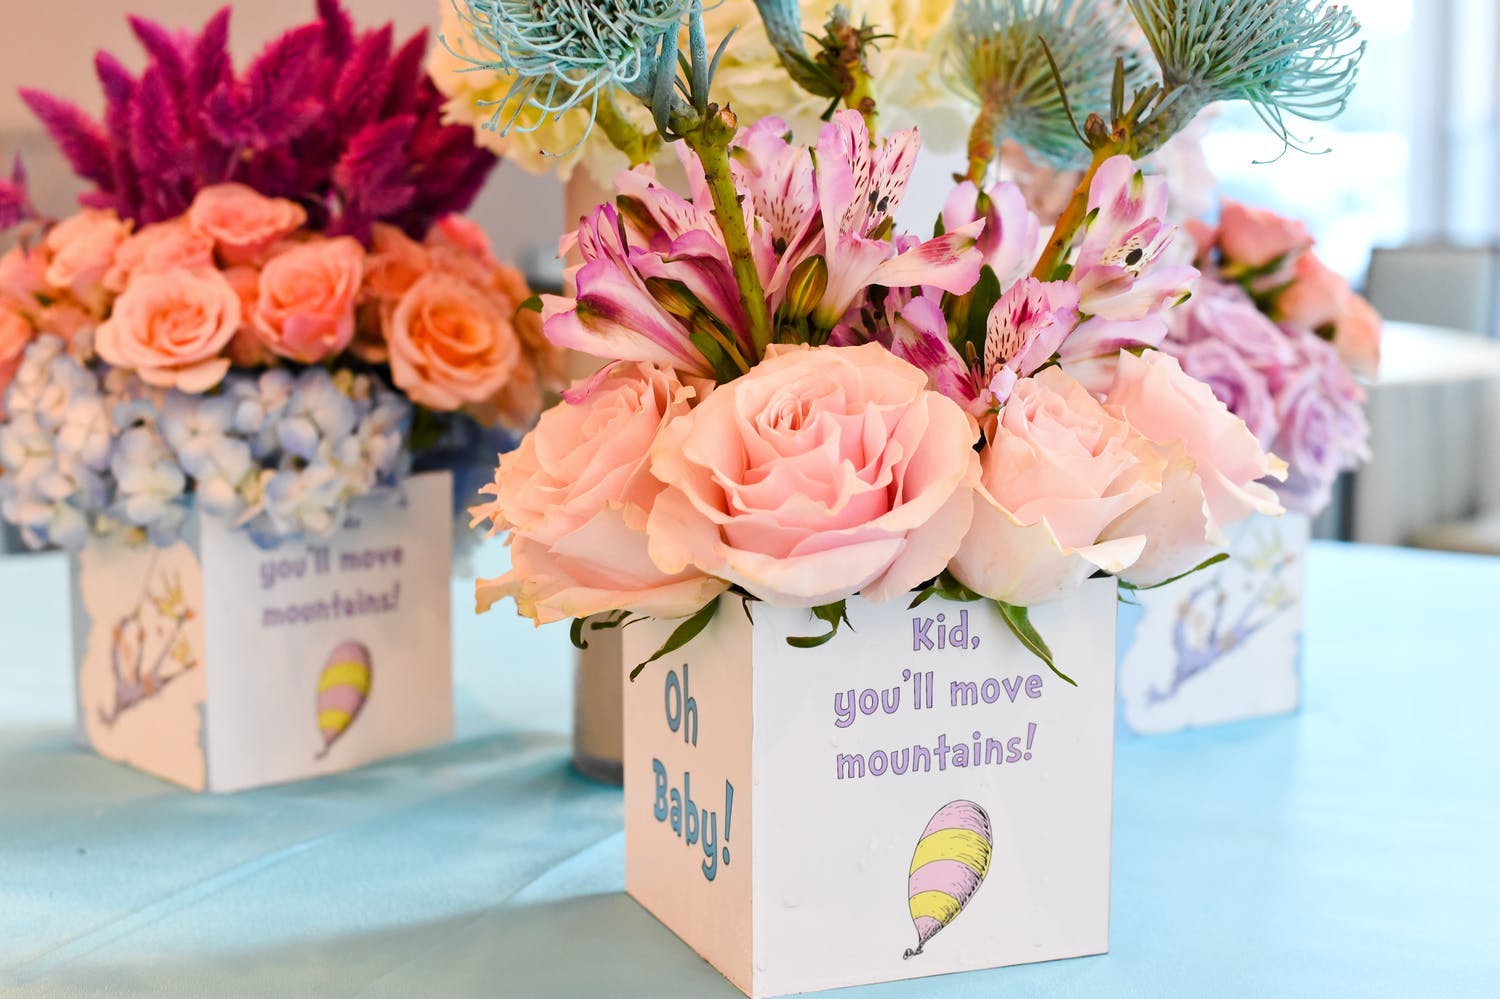 Dr. Seuss-Themed Baby Shower Centerpieces With Pink and Peach Flowers | PartySlate